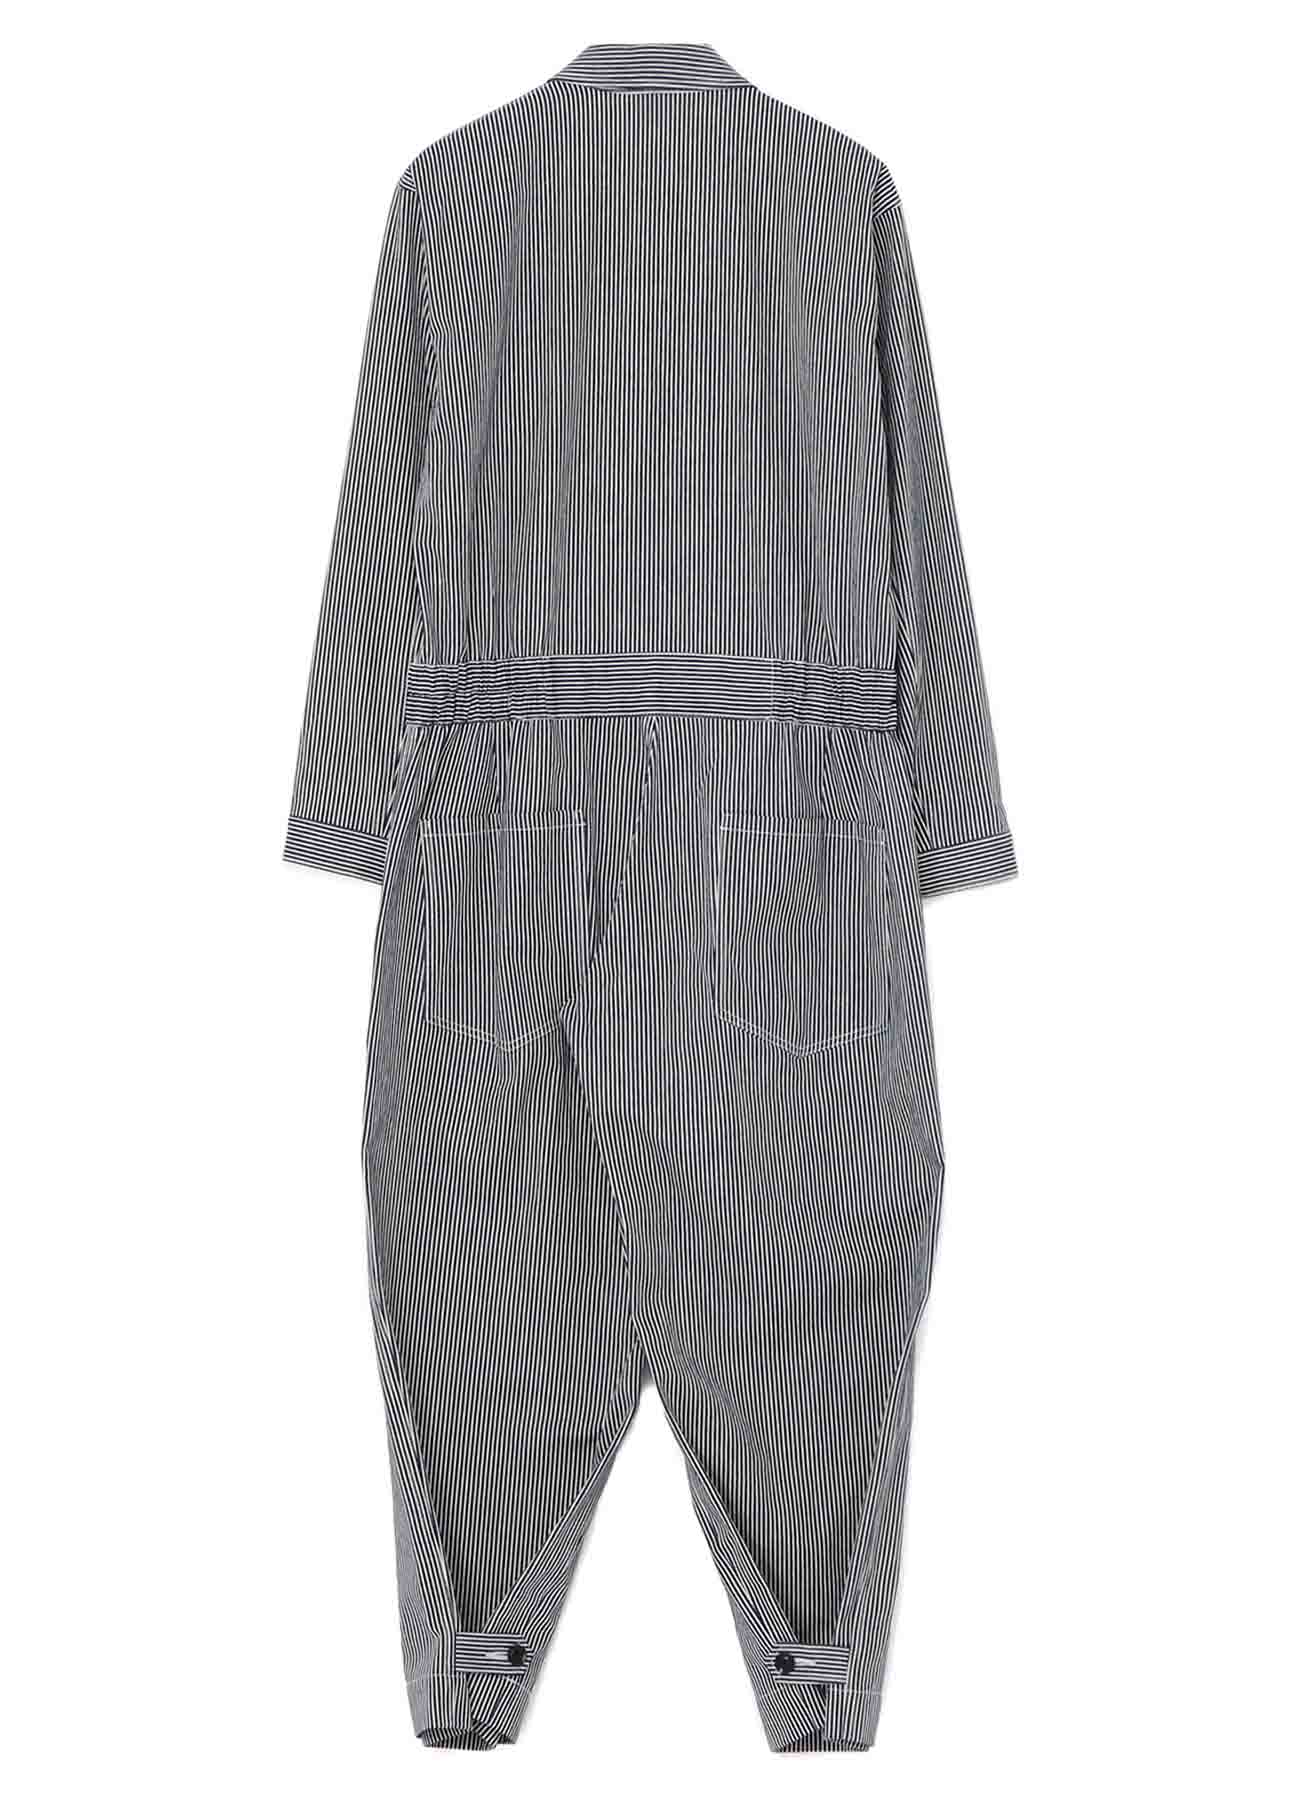 HICKORY JUMP SUIT